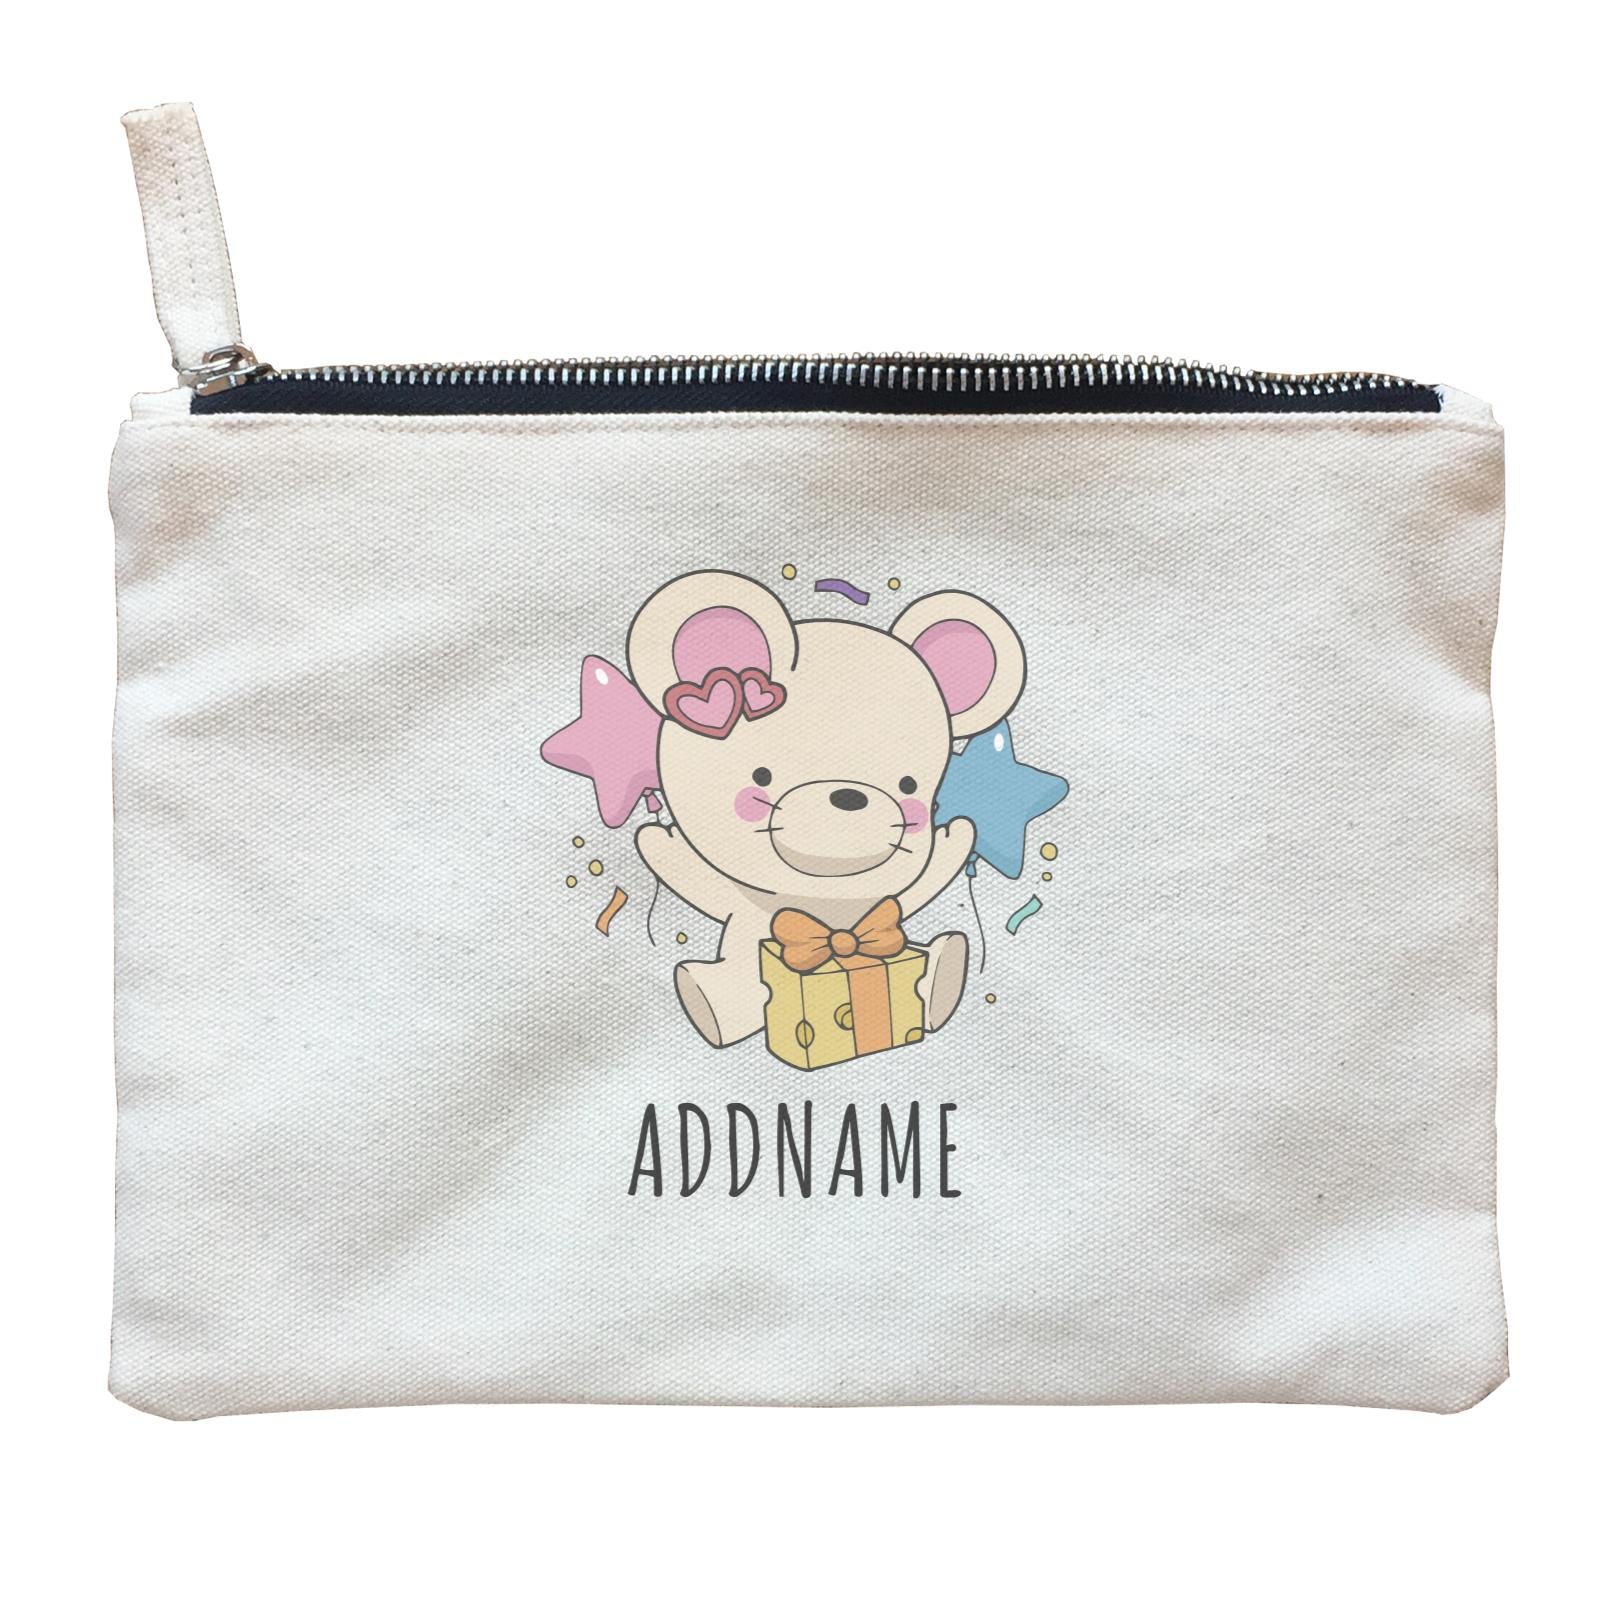 Birthday Sketch Animals Mouse with Cheese Present Addname Zipper Pouch